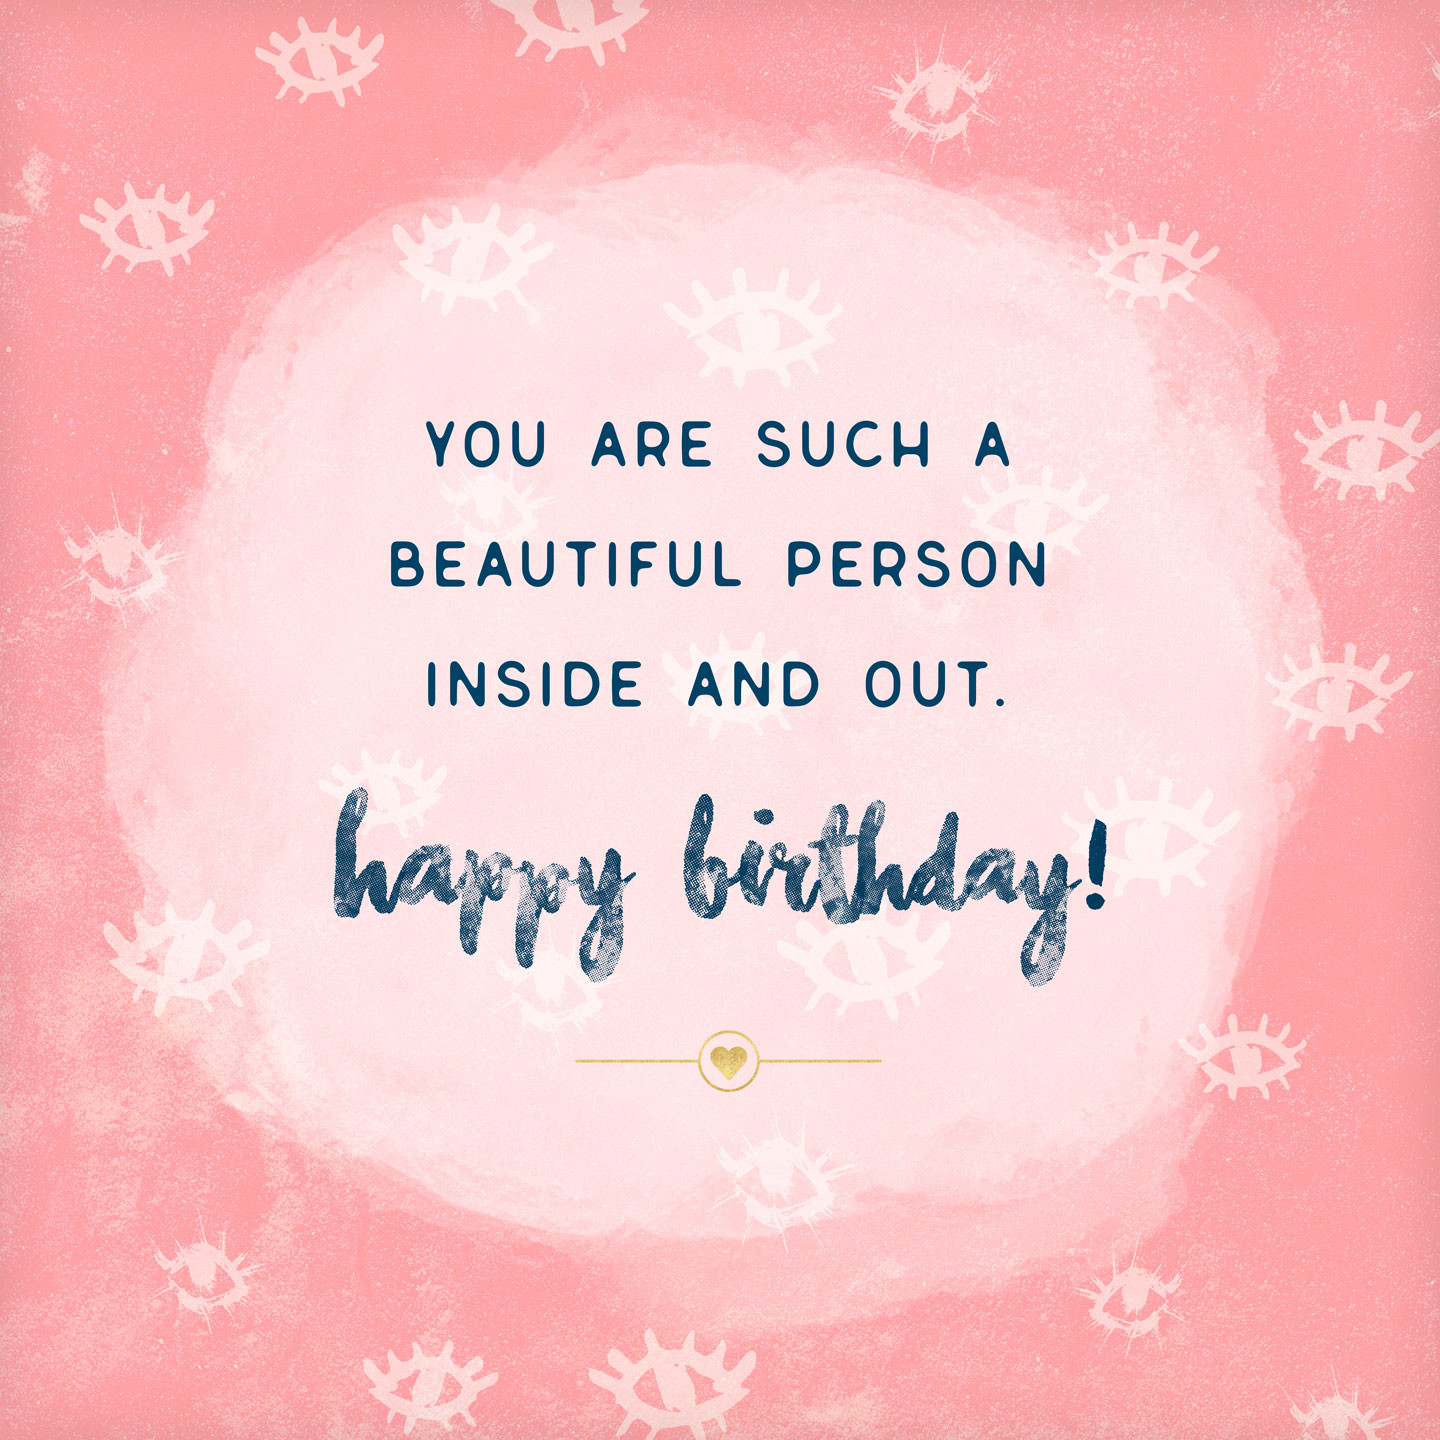 Birthday Card Message Ideas The 20 Best Ideas For Friend Birthday Card Message Home